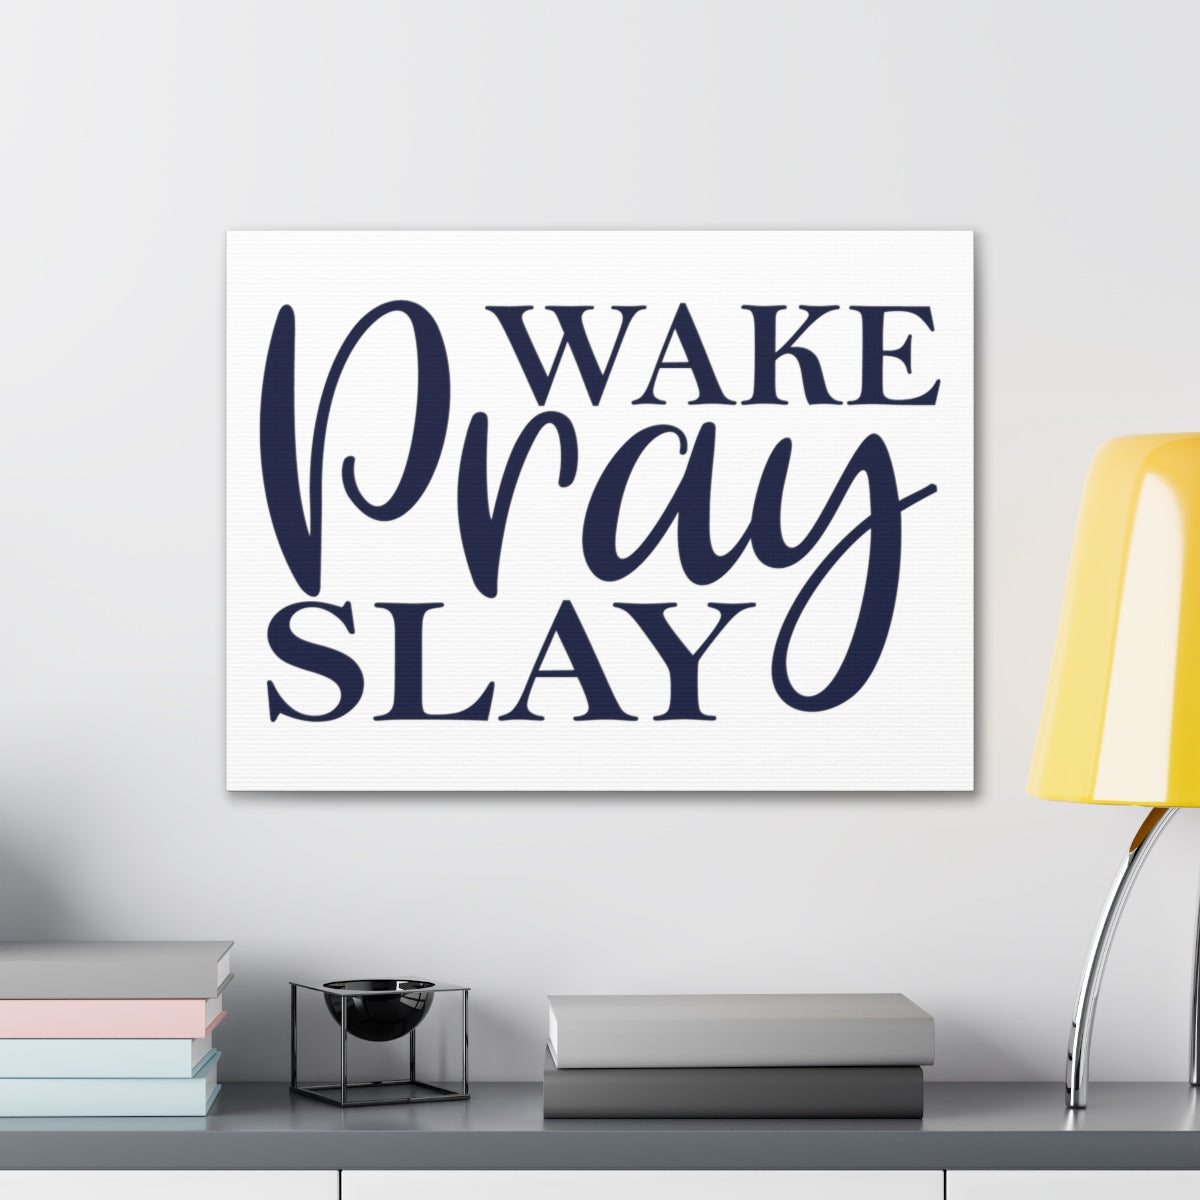 Scripture Walls Wake Pray Slay 2 Timothy 1:3 Christian Wall Art Print Ready to Hang Unframed-Express Your Love Gifts